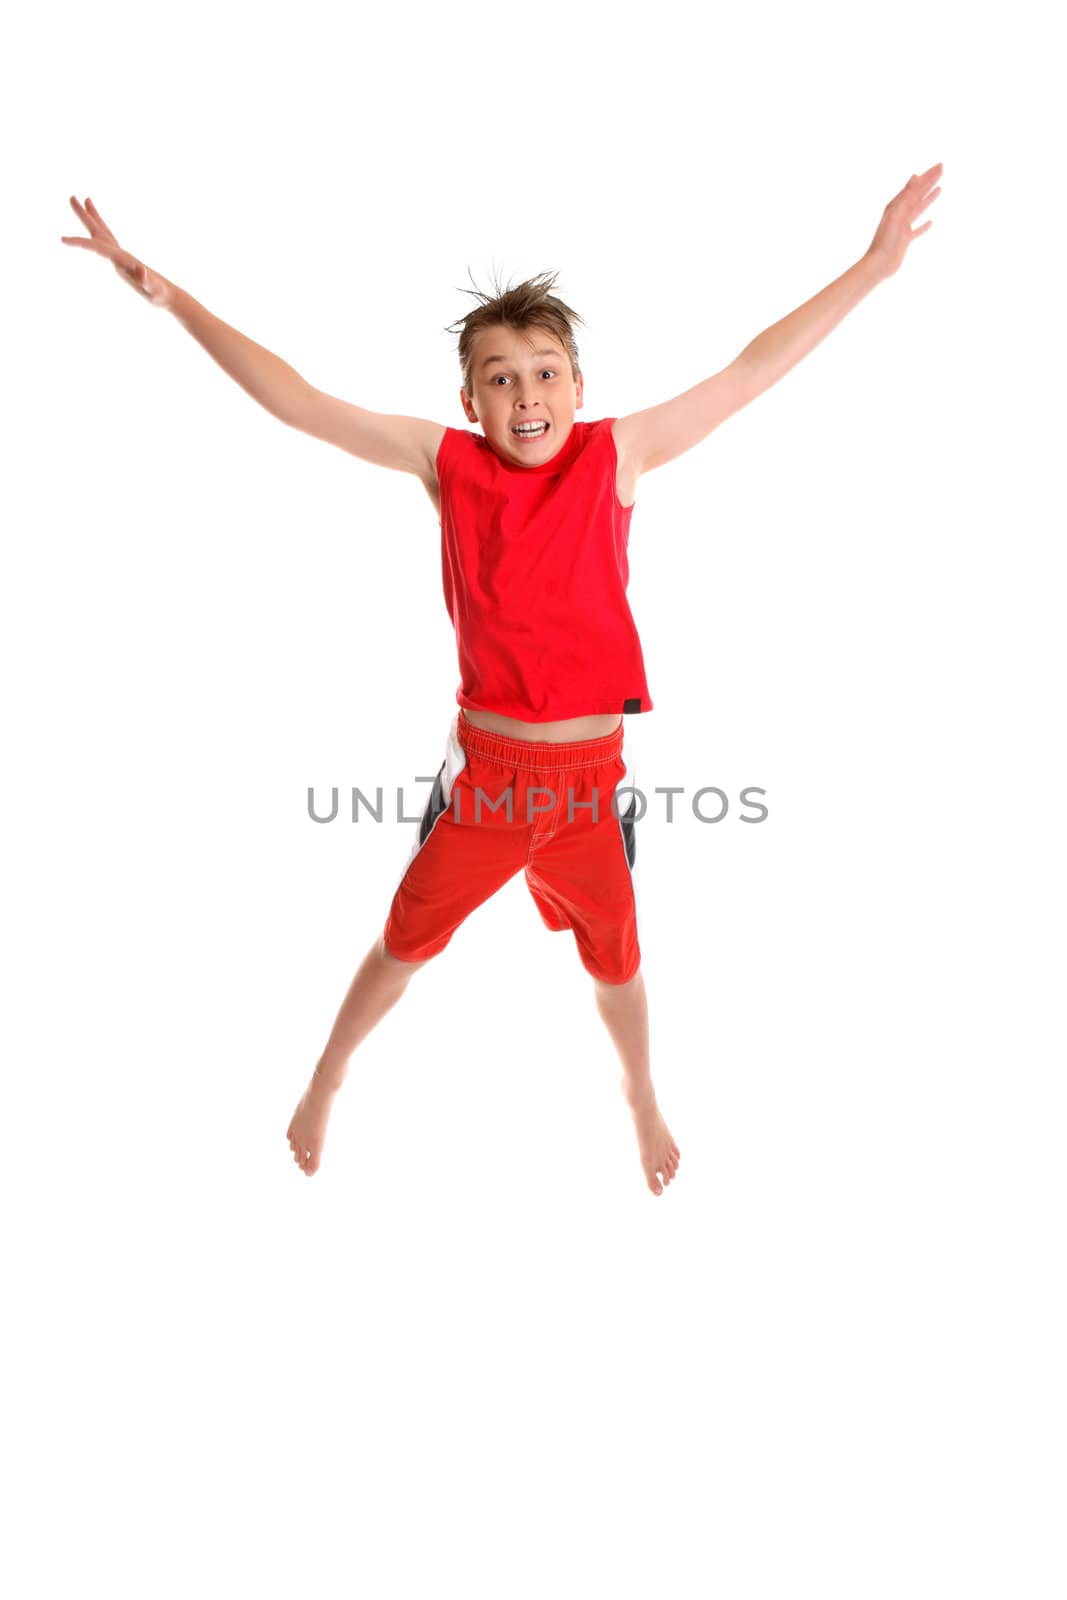 Starjump.  A young boy jumps into the air